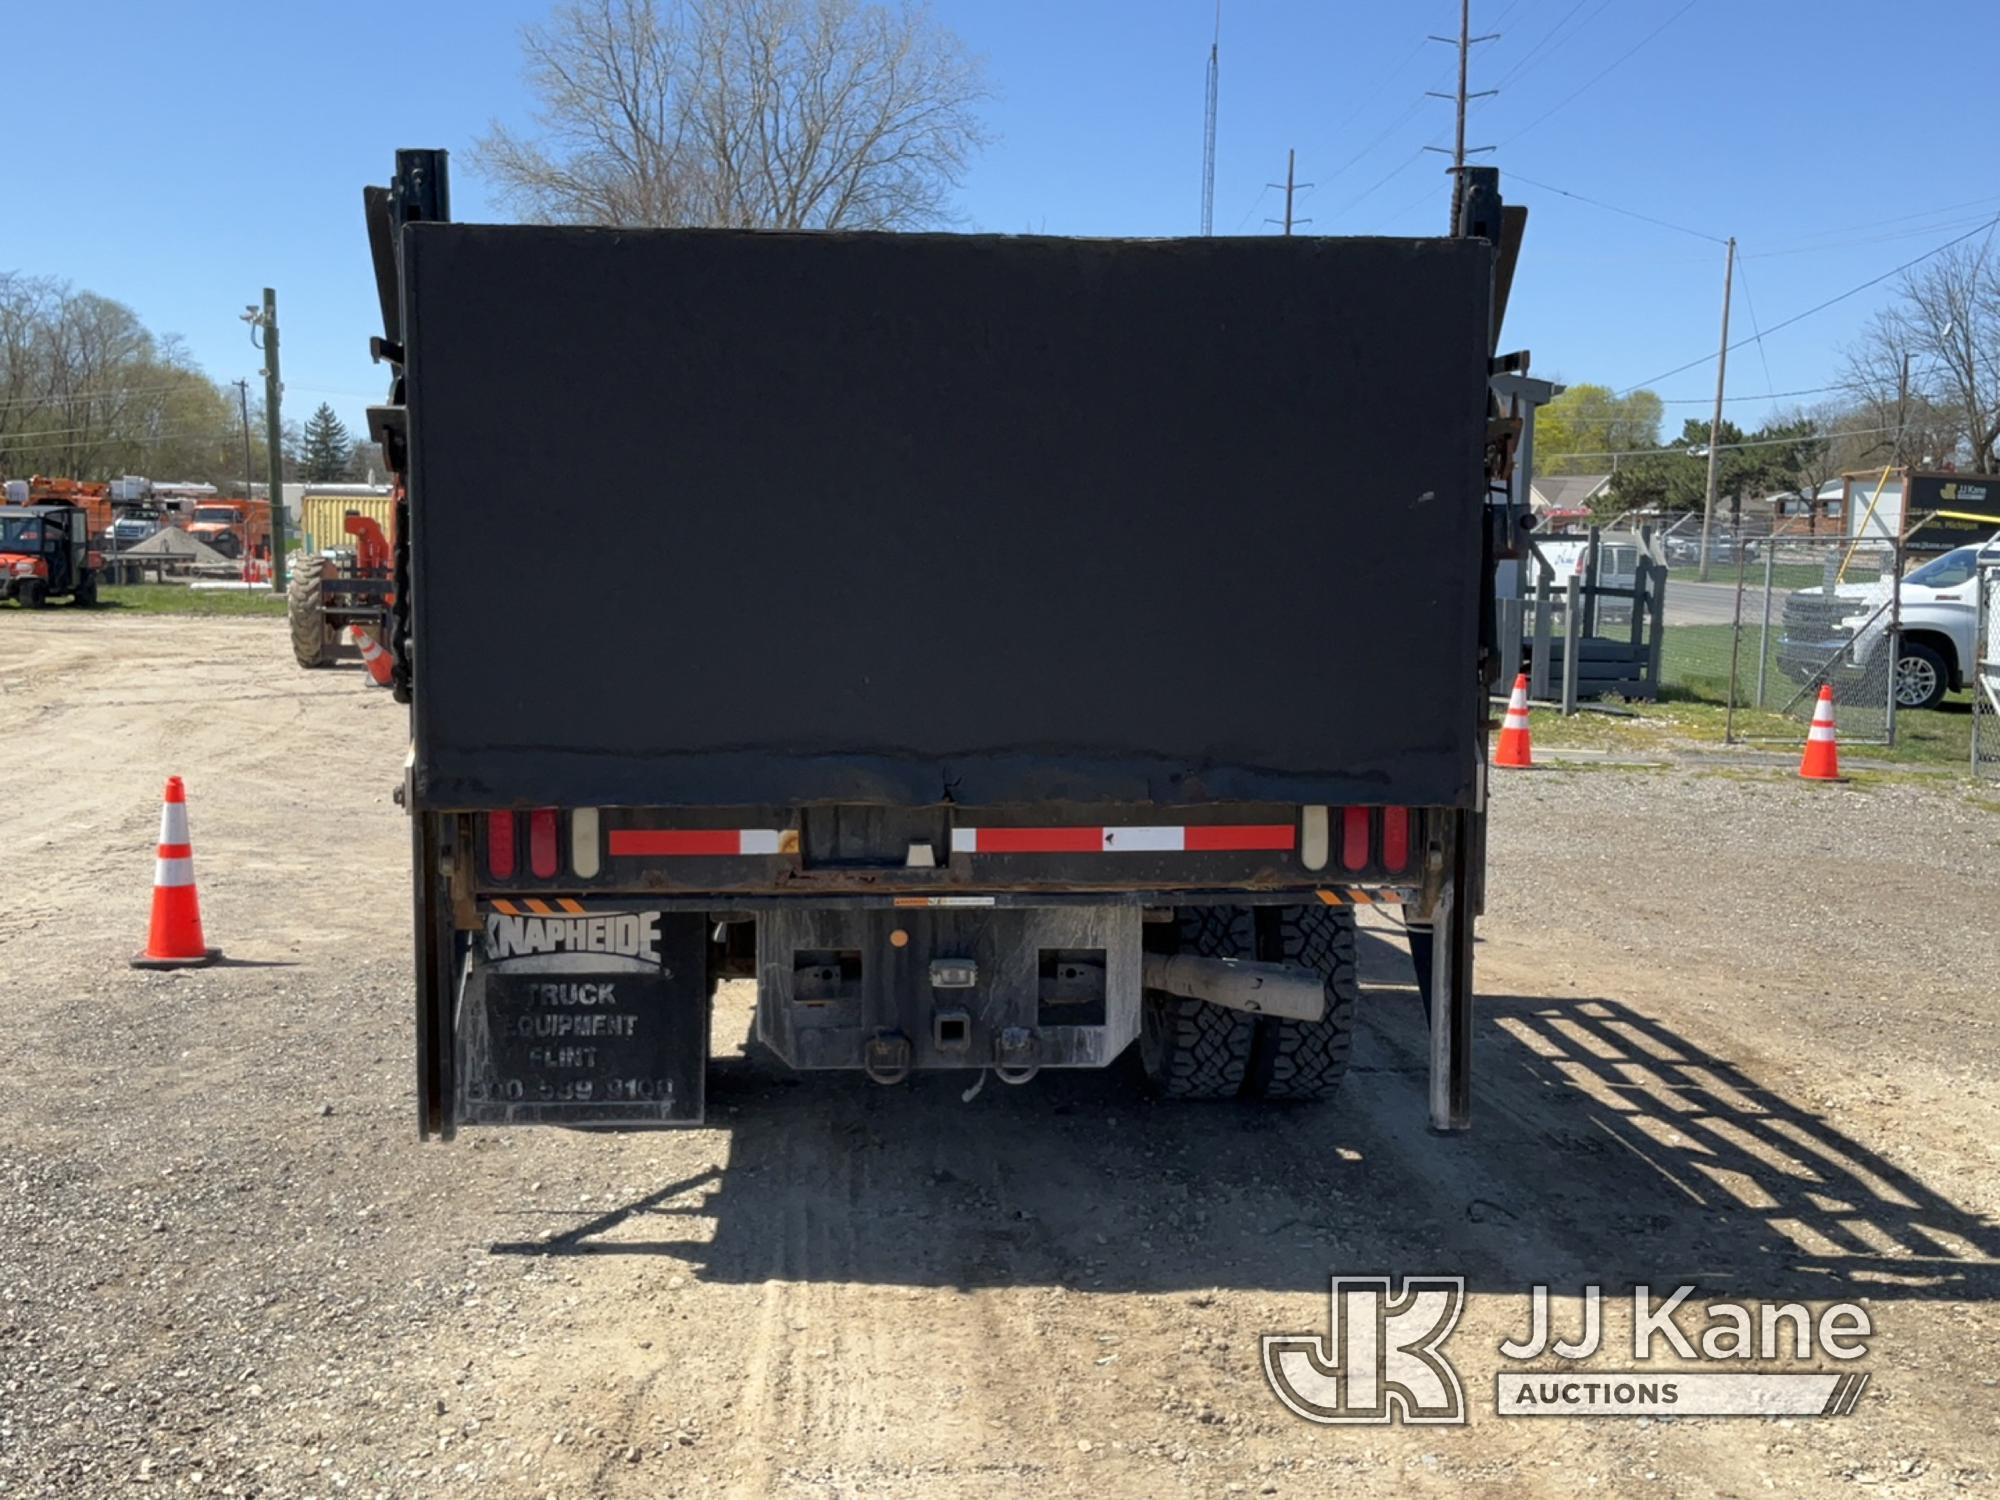 (Charlotte, MI) 2008 Ford F350 4x4 Flatbed Truck Runs, Moves, Rust, Rotted Boards On Bed